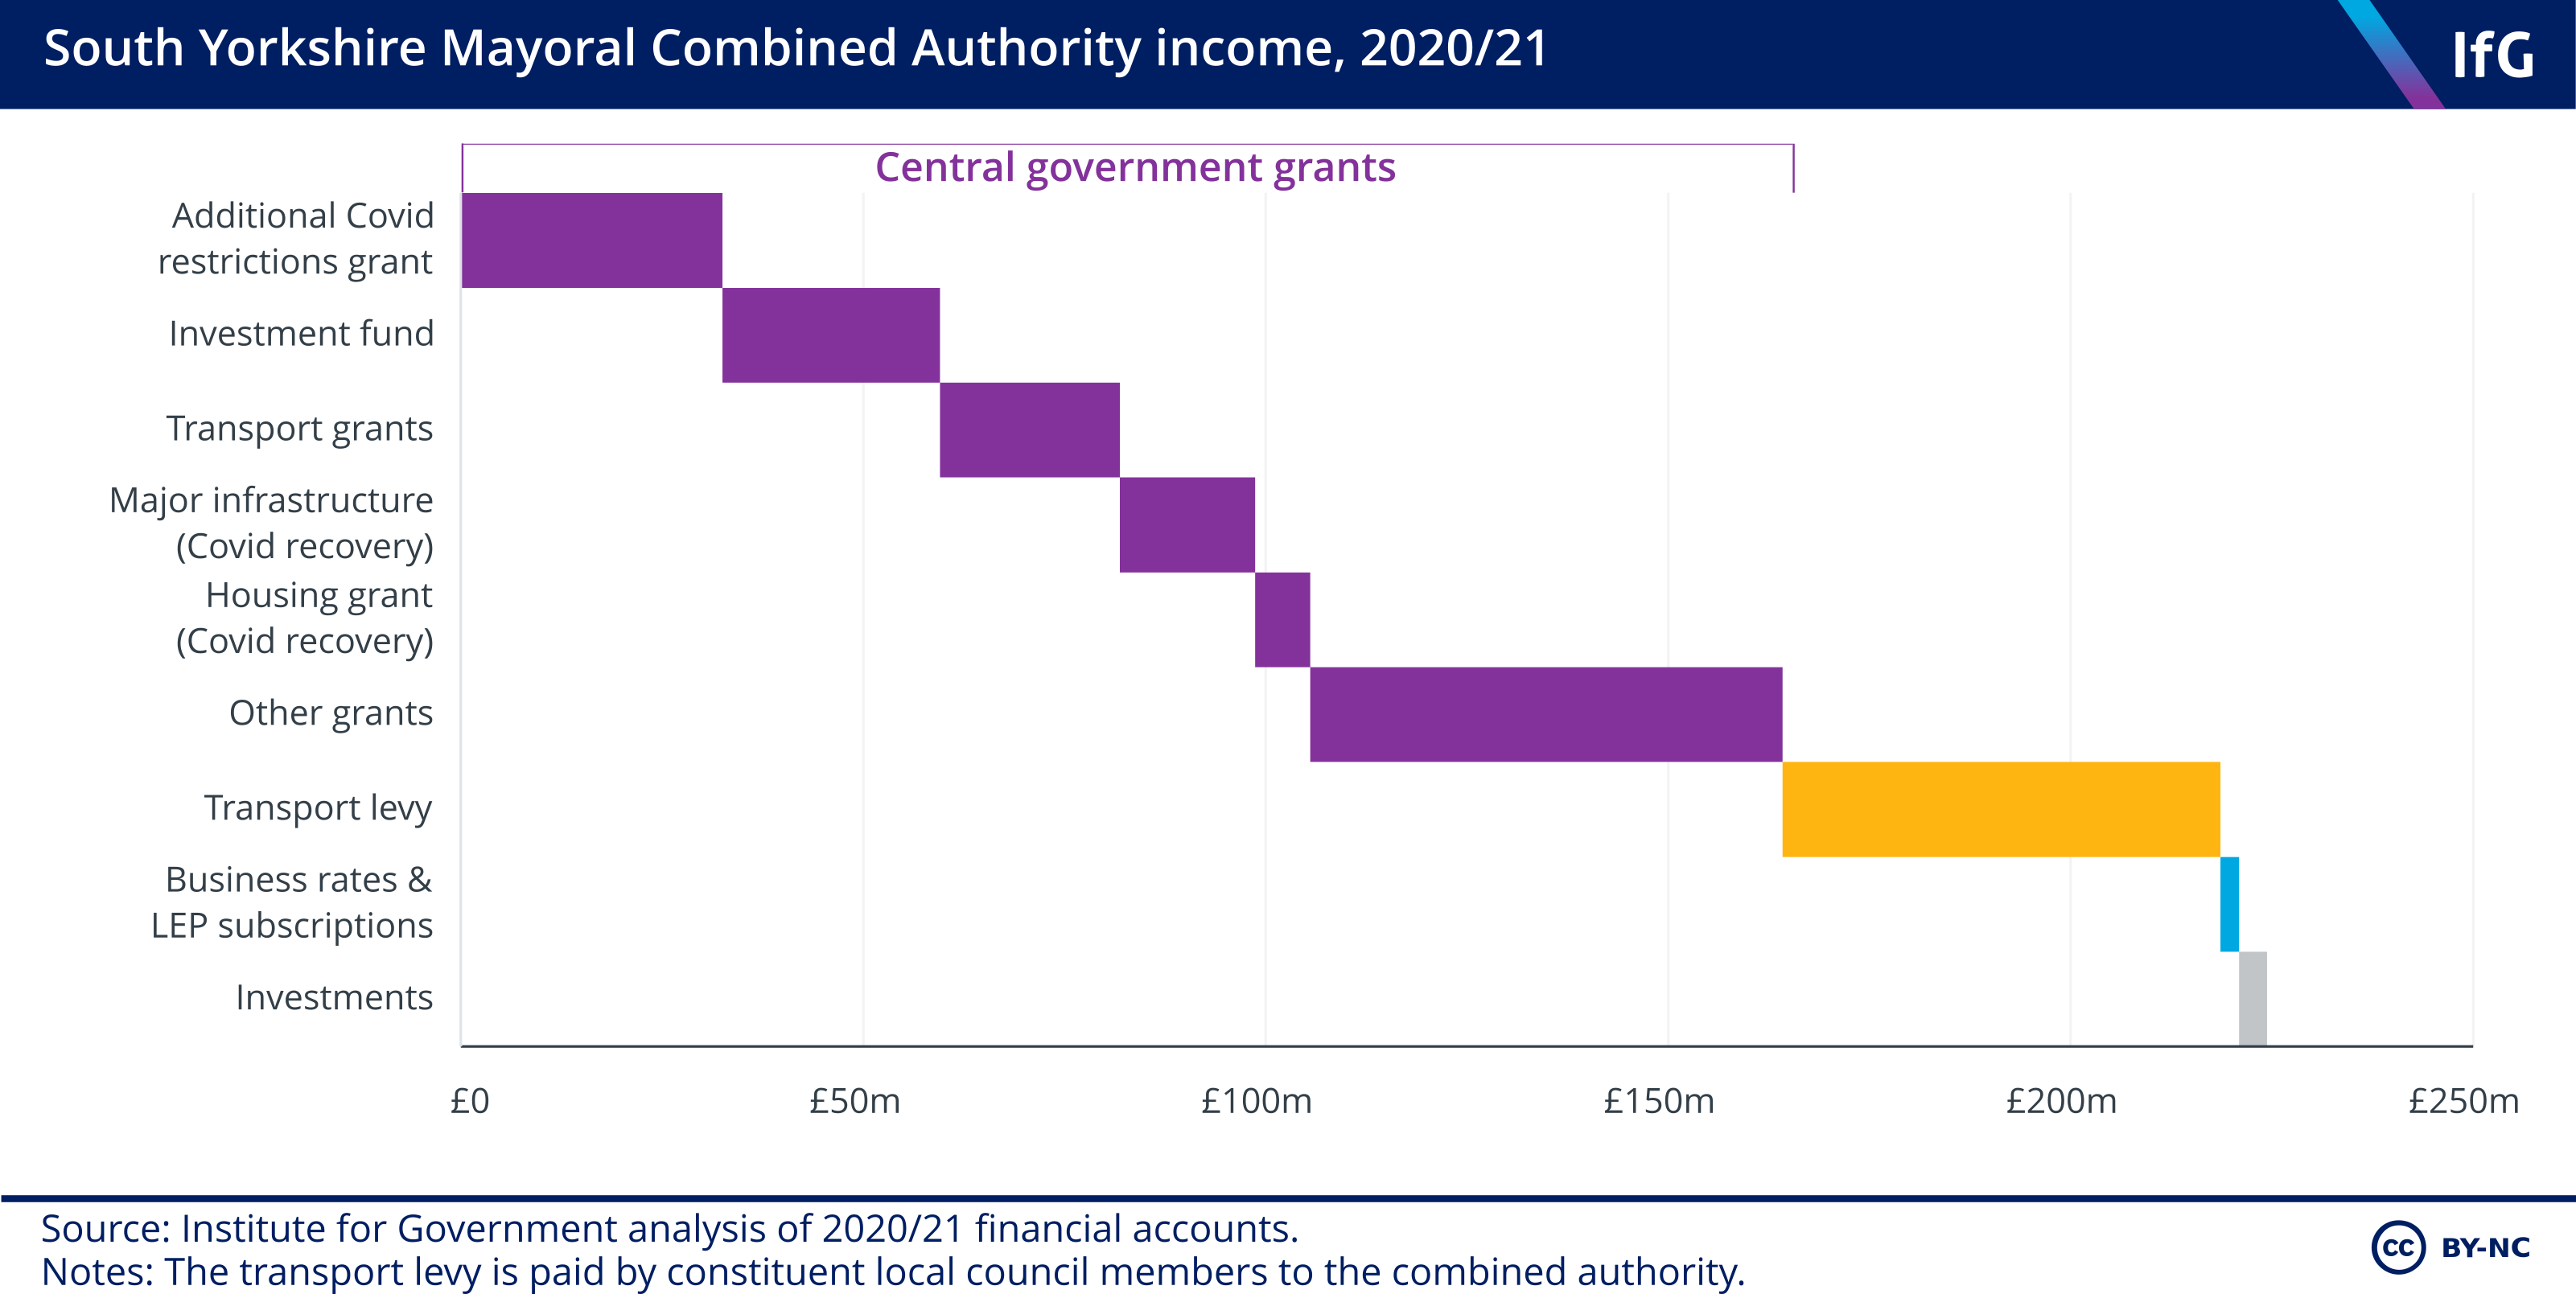 South Yorkshire Mayoral Combined Authority income, 2020/21